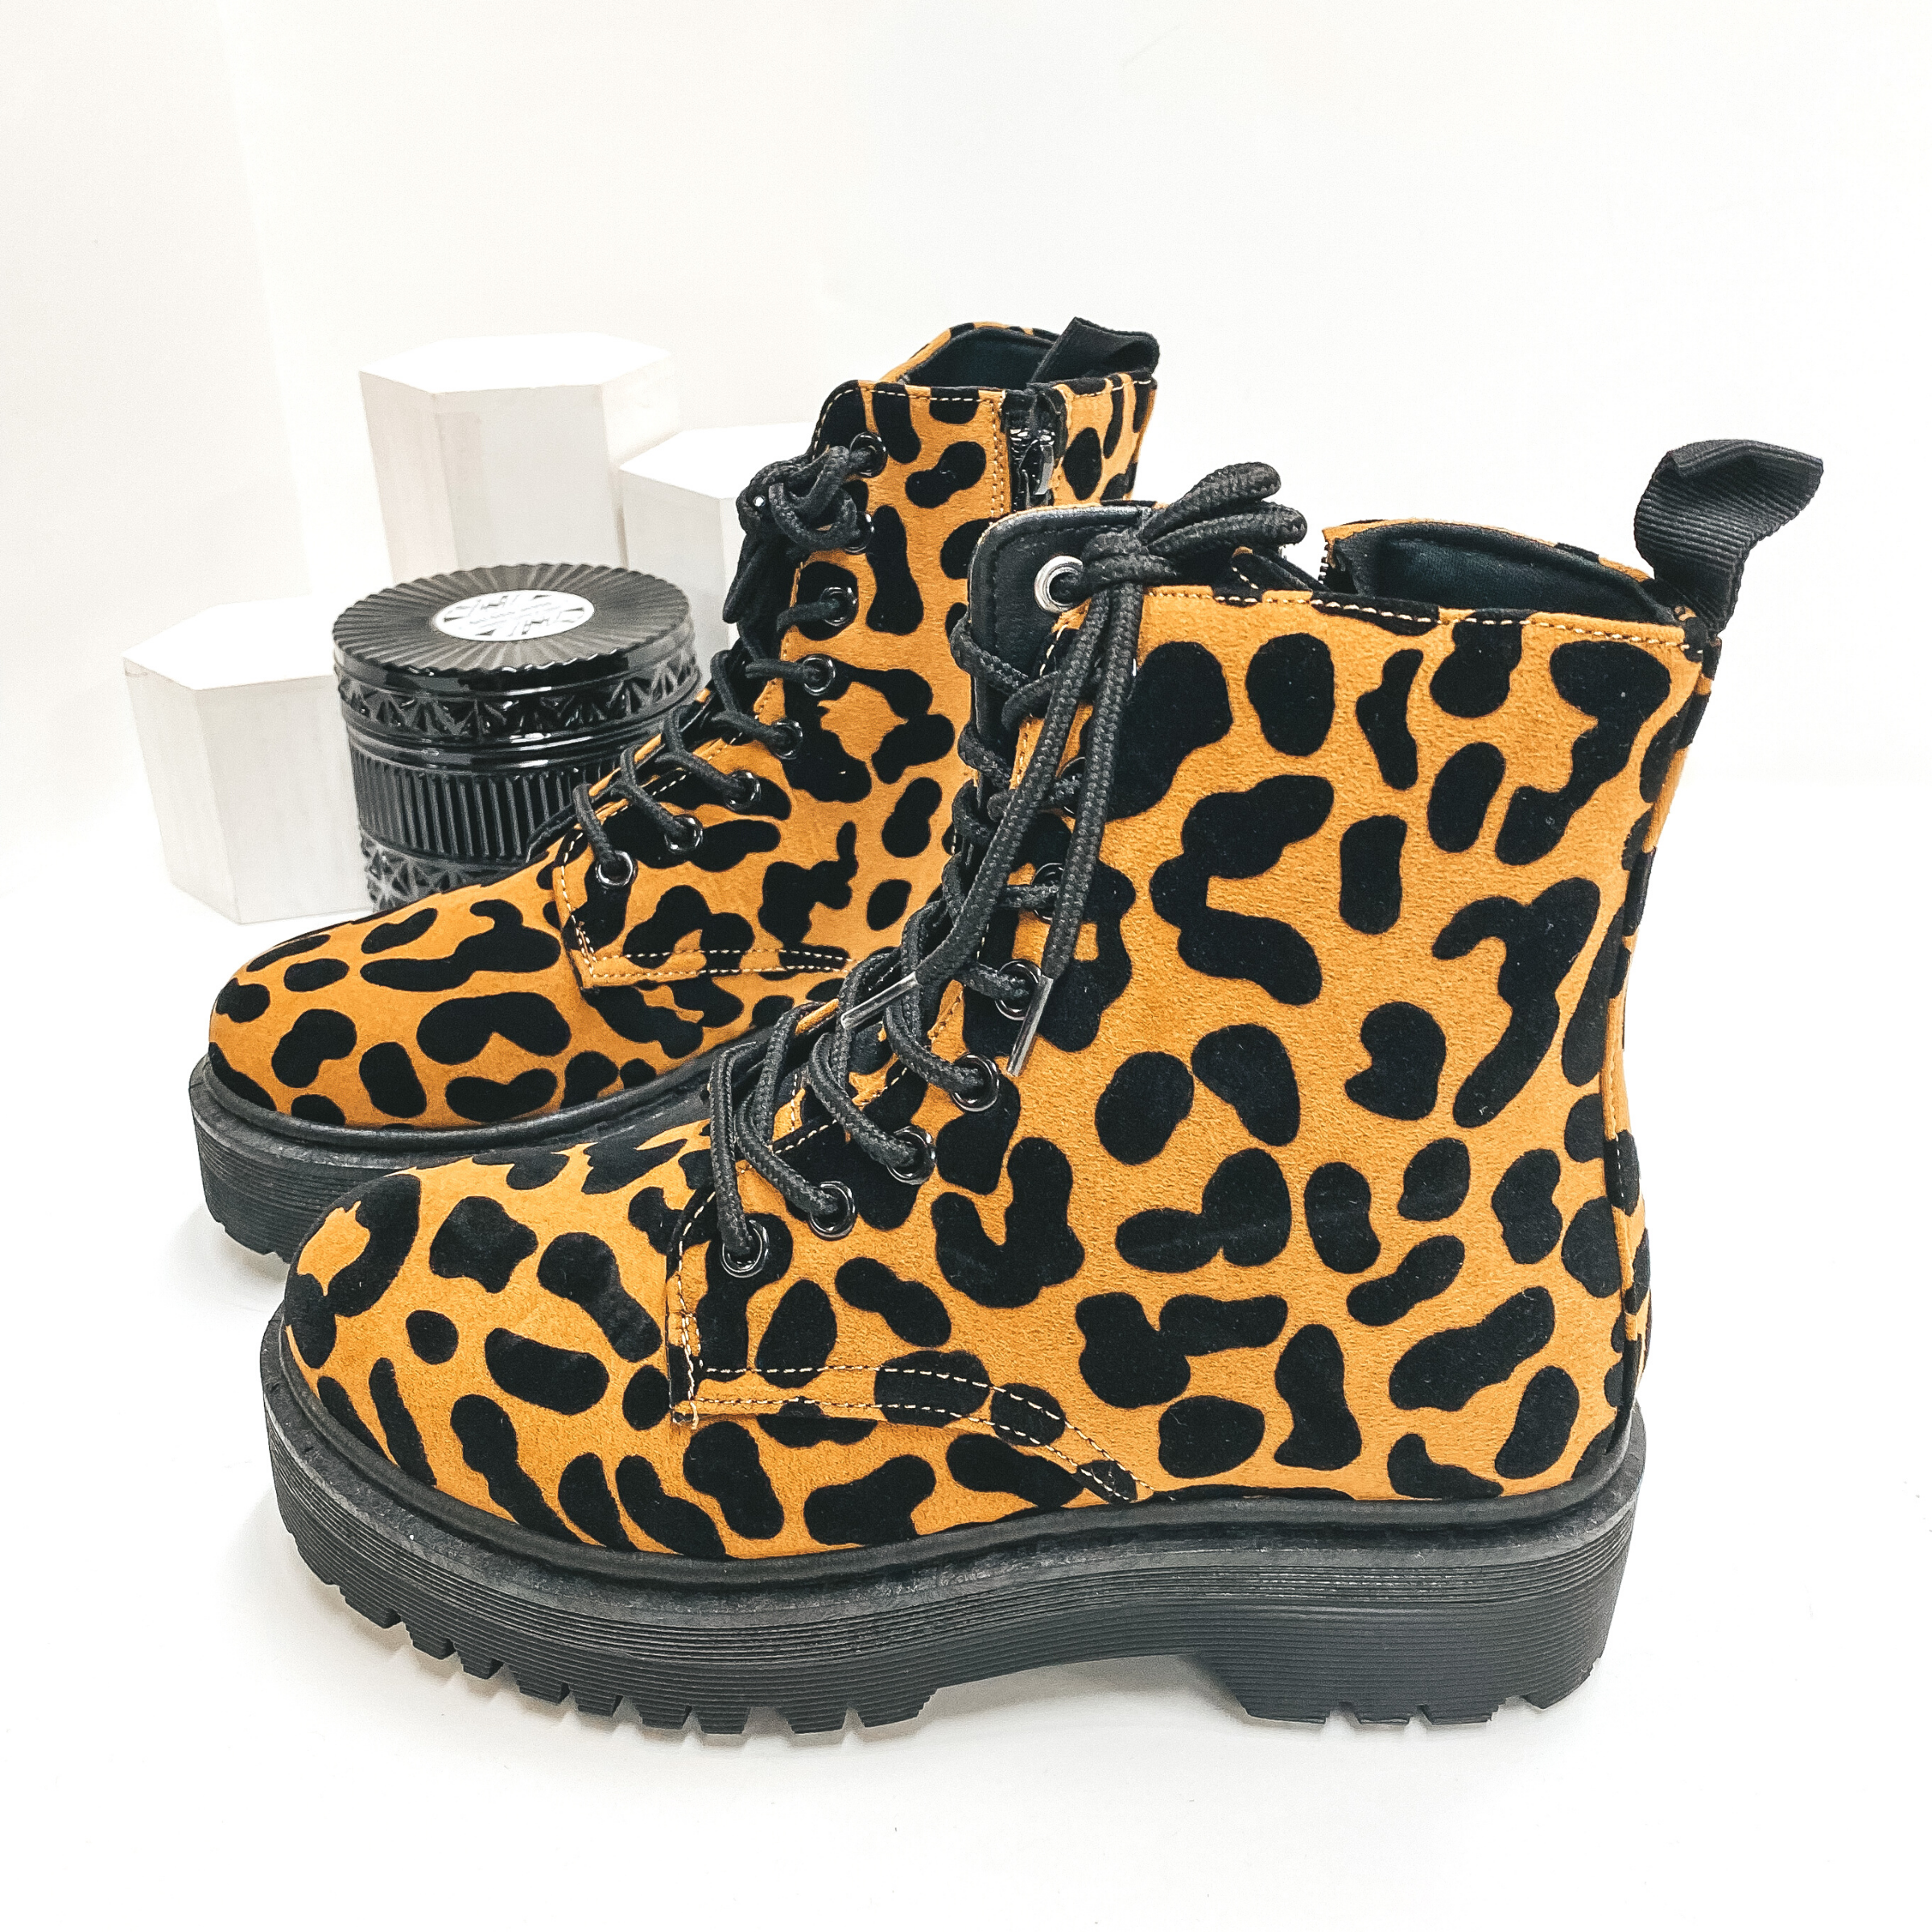 Born to be Wild Combat Boots in Leopard - Giddy Up Glamour Boutique